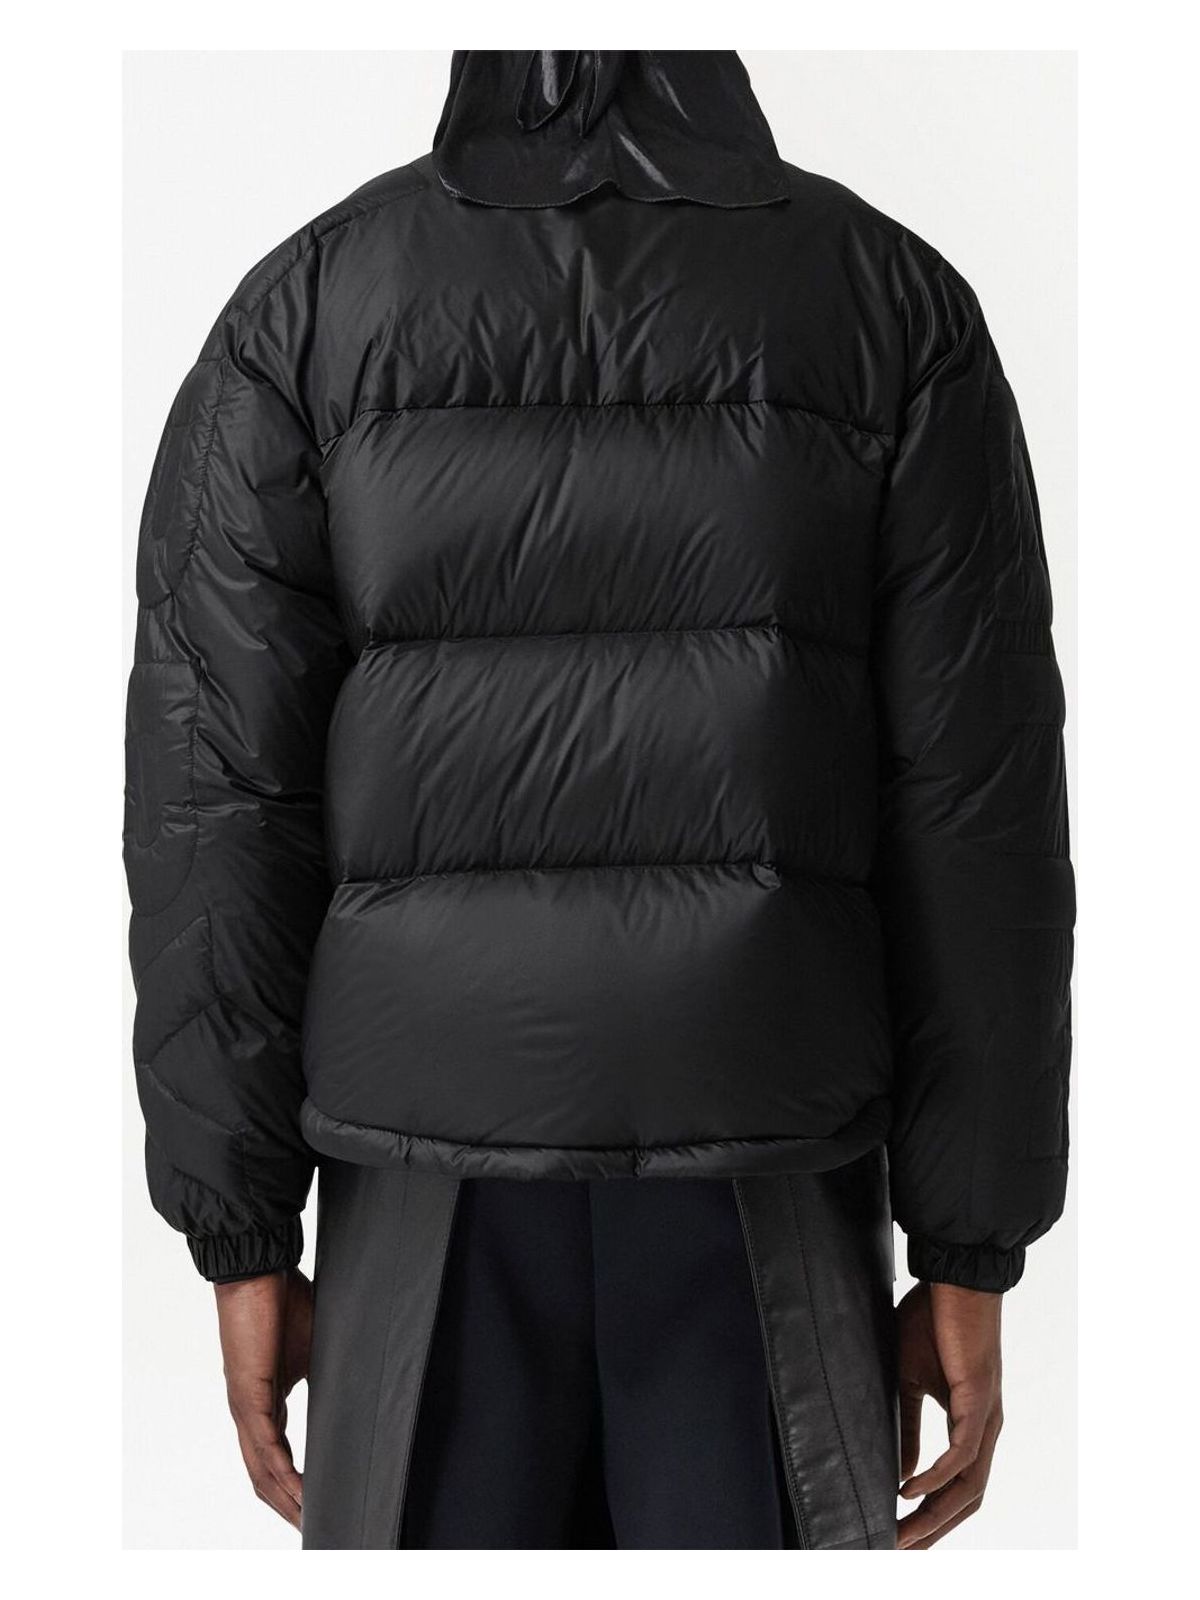 149058 BURBERRY QUILTED NYLON PUFFER JACKET